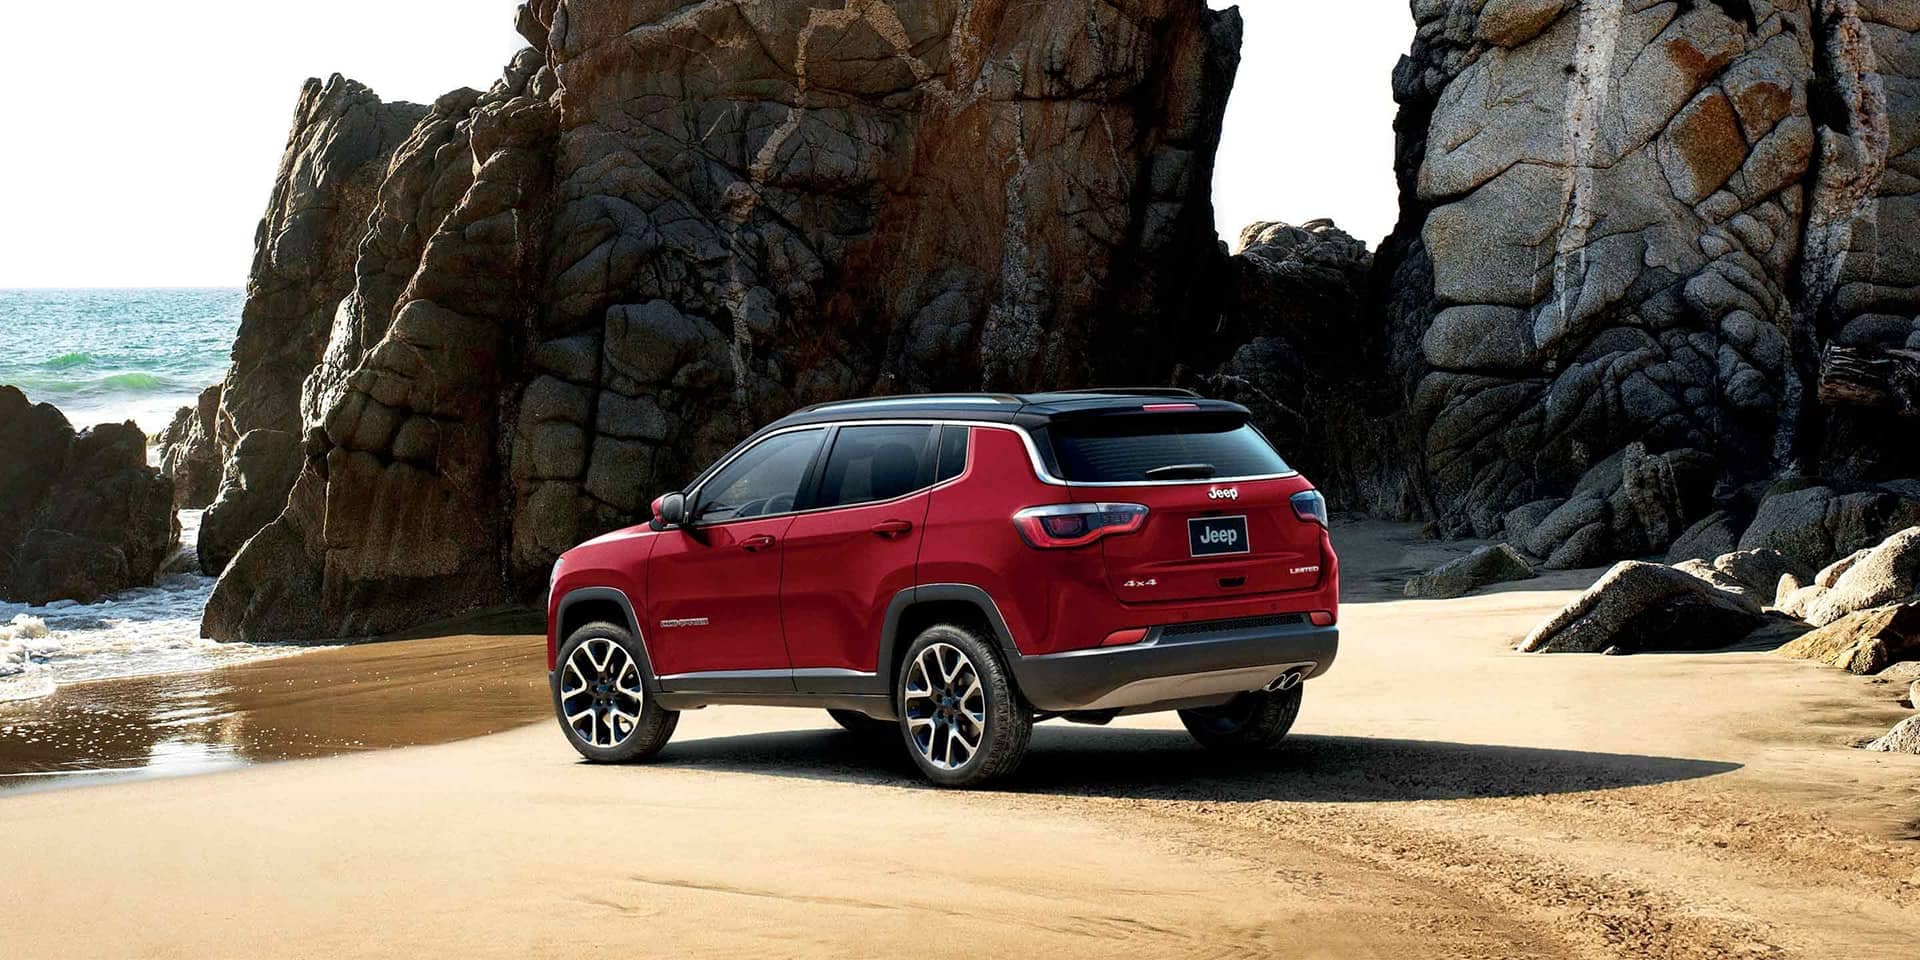 2019-Jeep-Compass-Gallery-Exterior-Laltitude-Red-Back-Beach